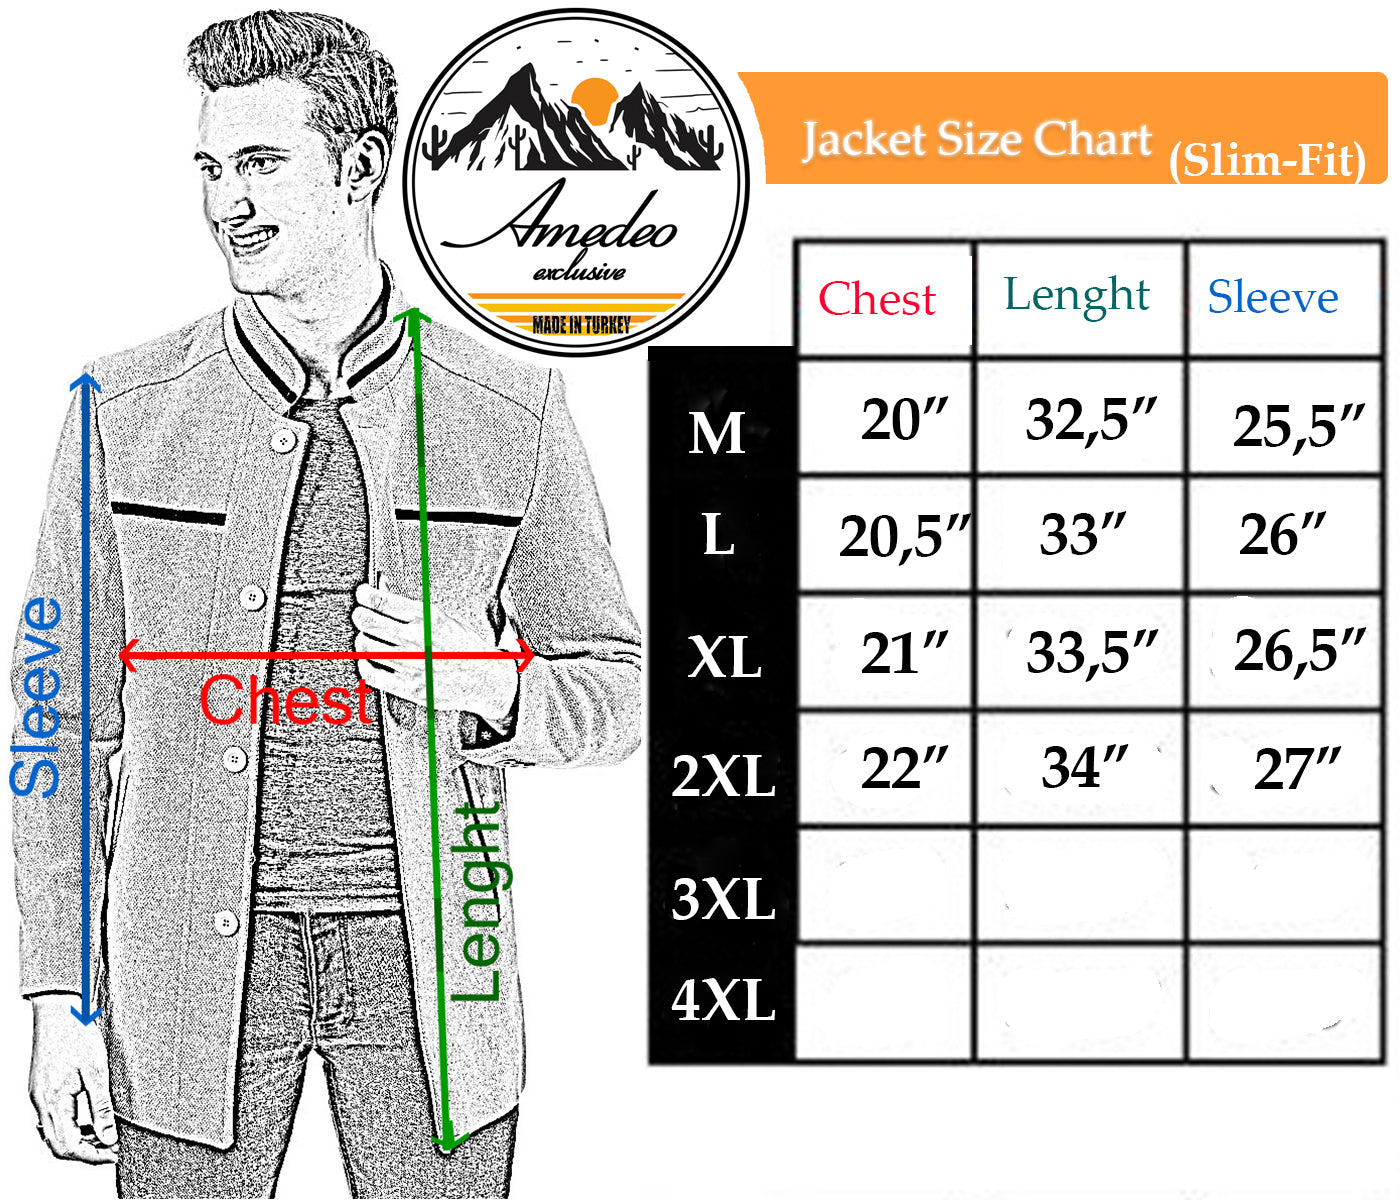 Men's European Black Wool Coat Jacket Tailor fit Fine Luxury Quality Work and Casual